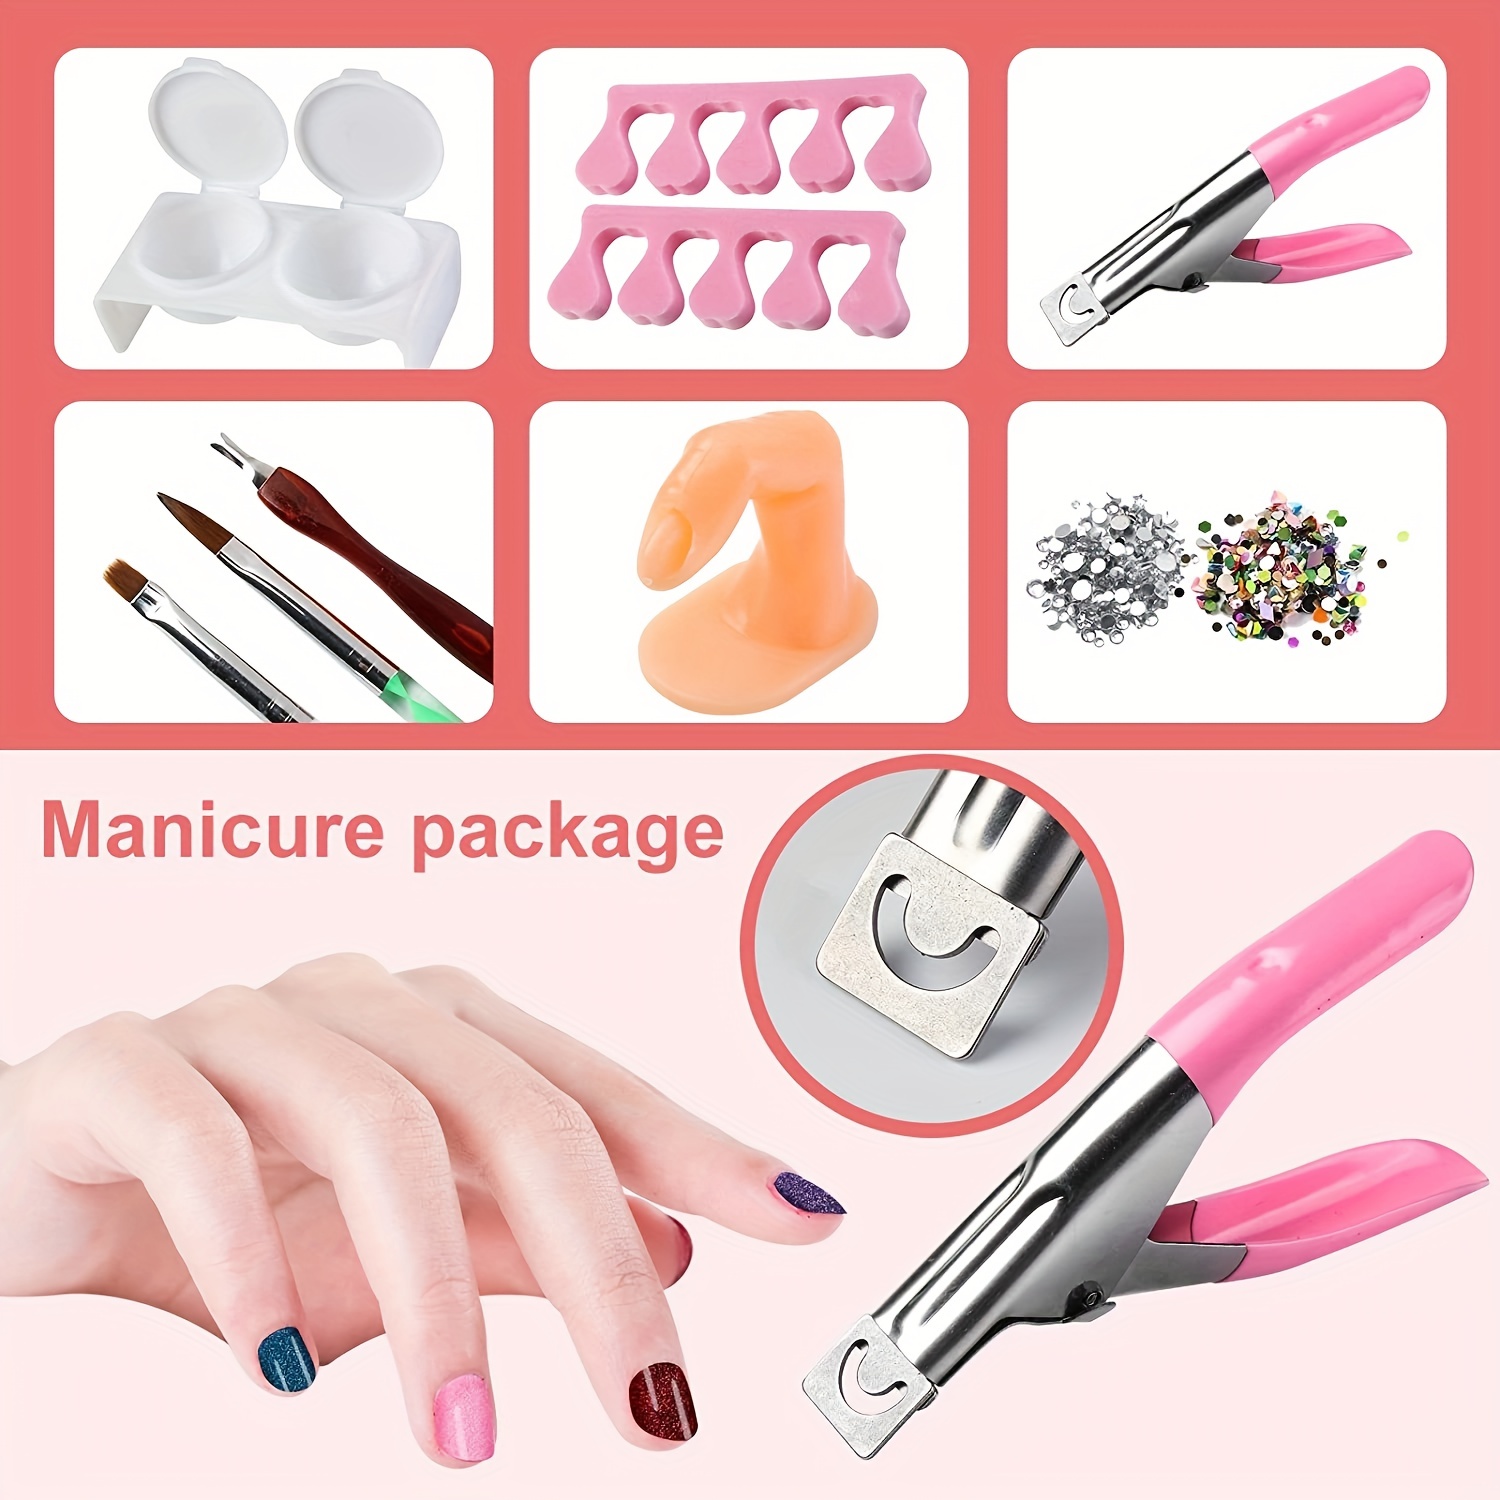 Professional Acrylic Nail Kit Set With Everything 12 Glitter Acrylic Powder Kit Practice Hand With Fingers Nail Art Tips Nail Art Decoration Nail Monomer Liquid DIY Nail Art Tool Nail Supplies Acrylic System For Beginners details 2